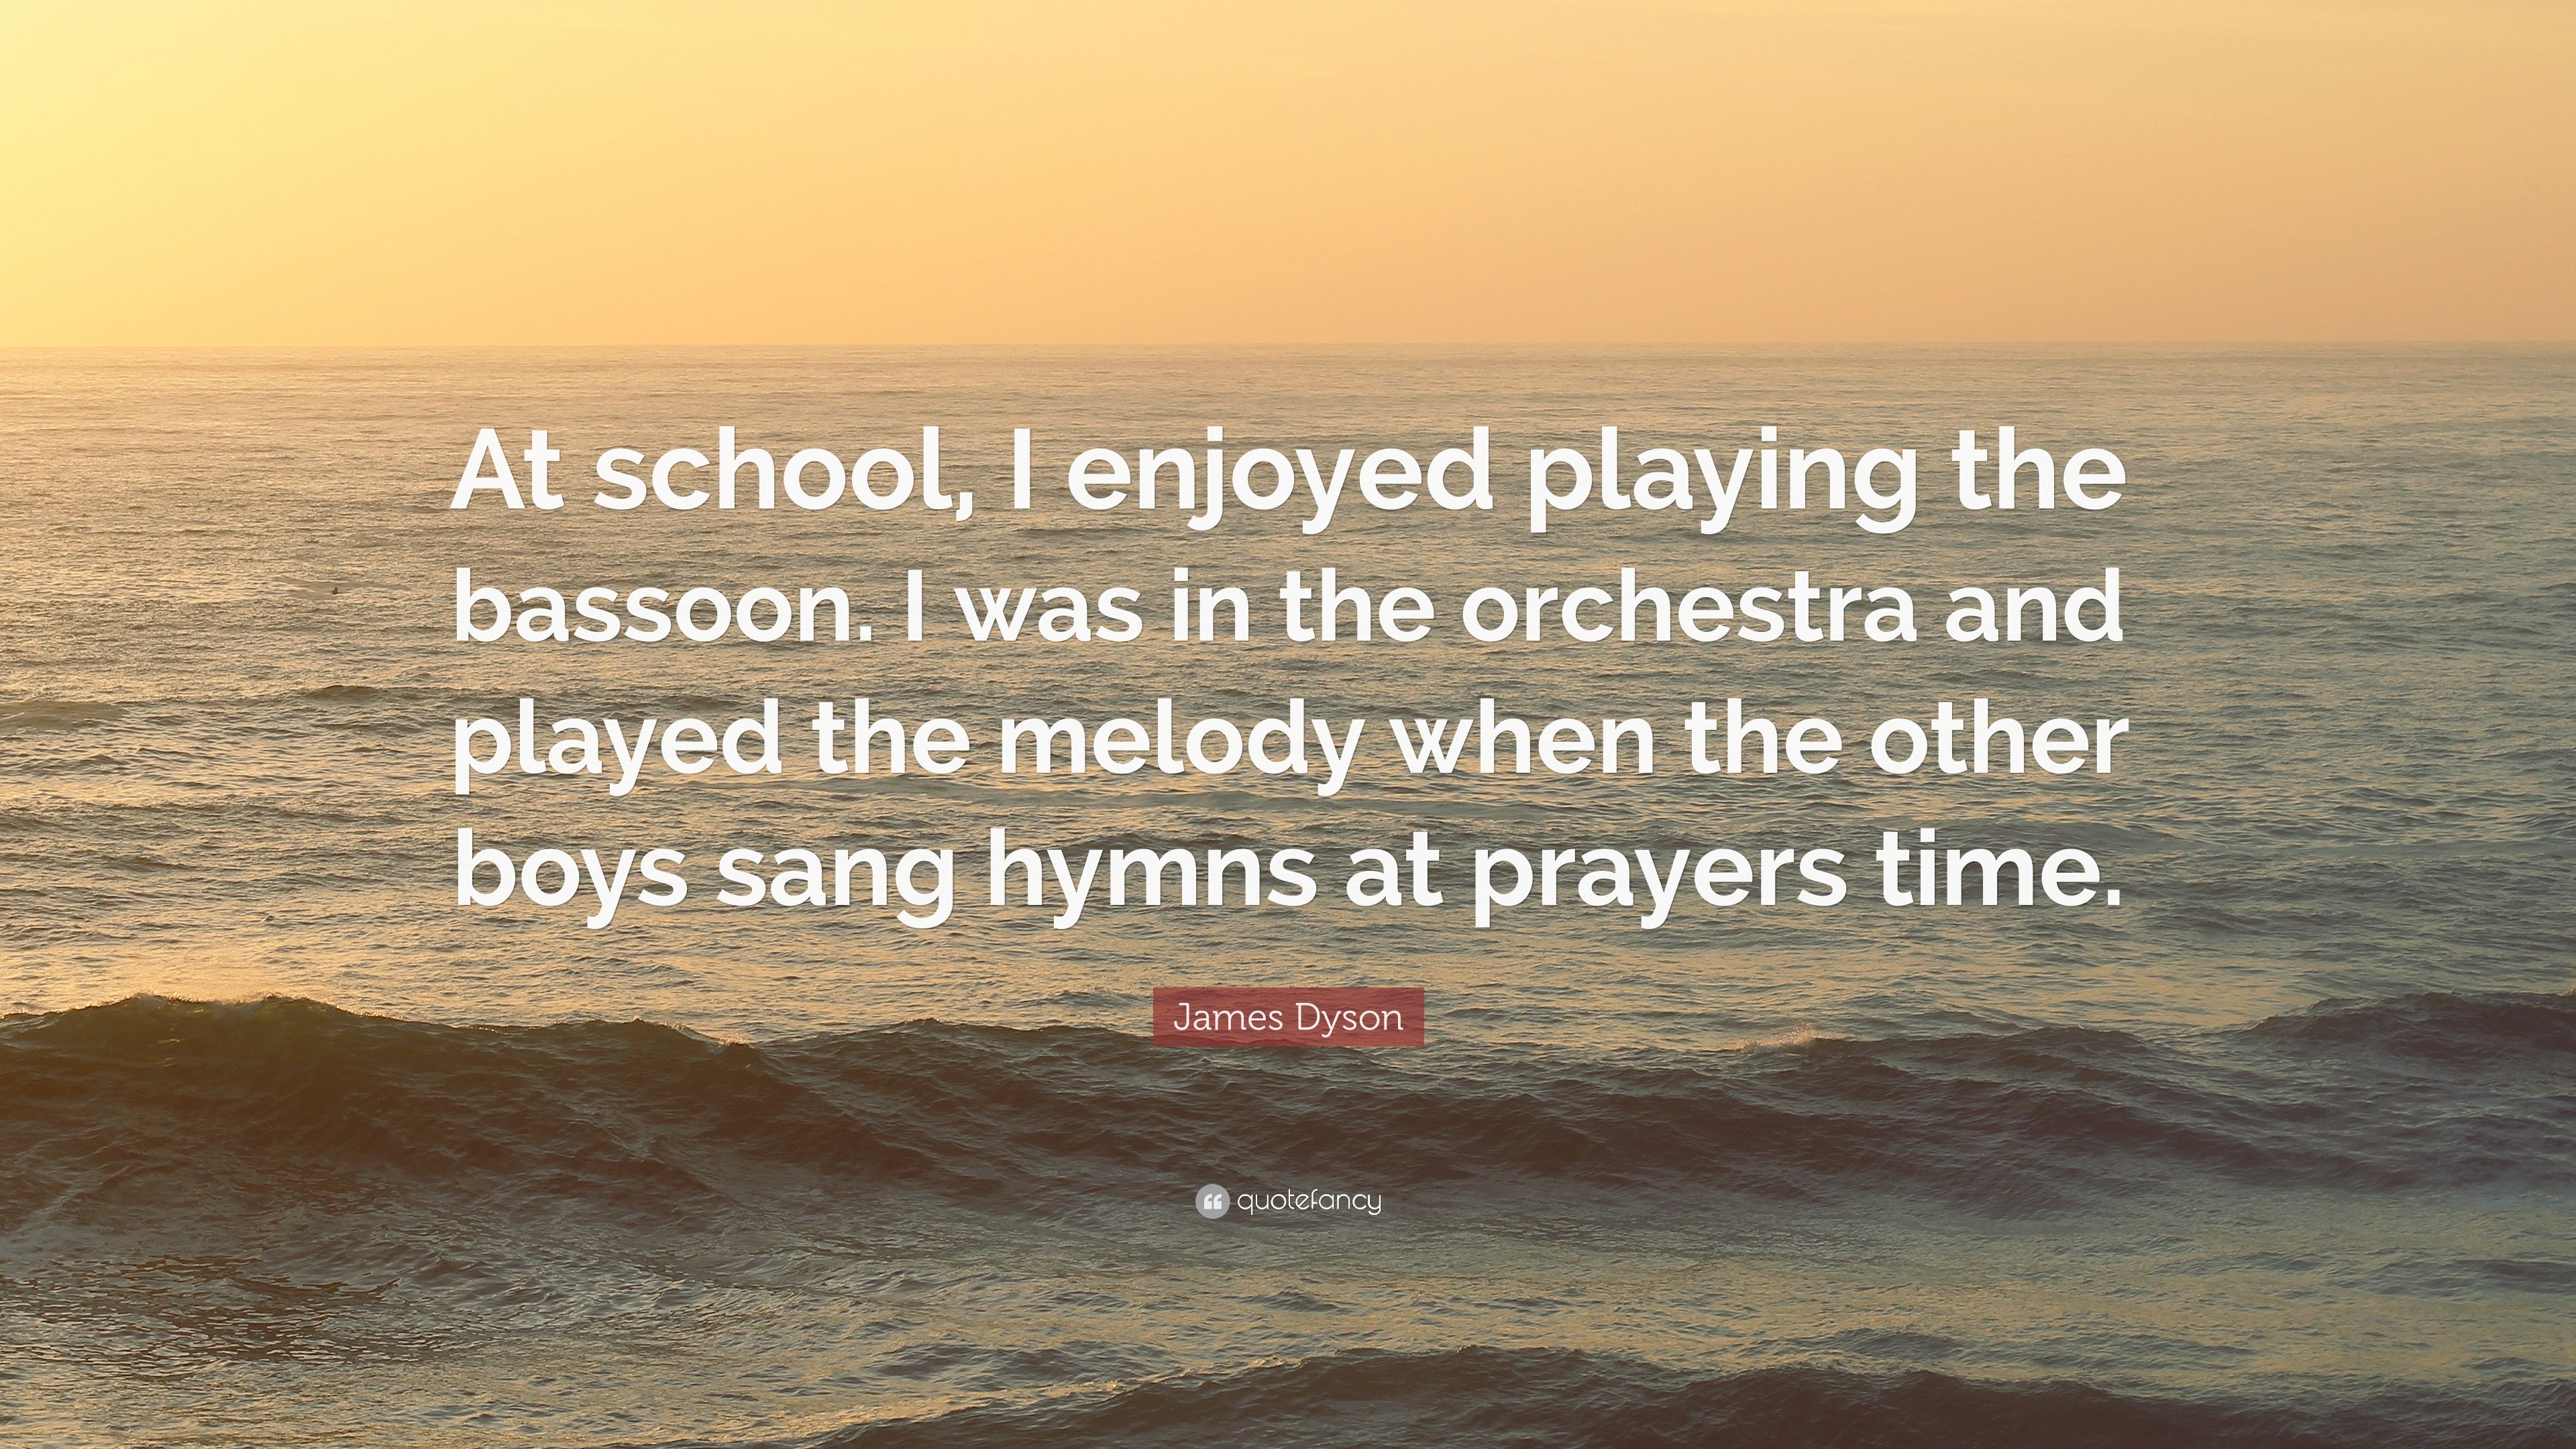 James Dyson Quote: “At school, I enjoyed playing the bassoon. I was